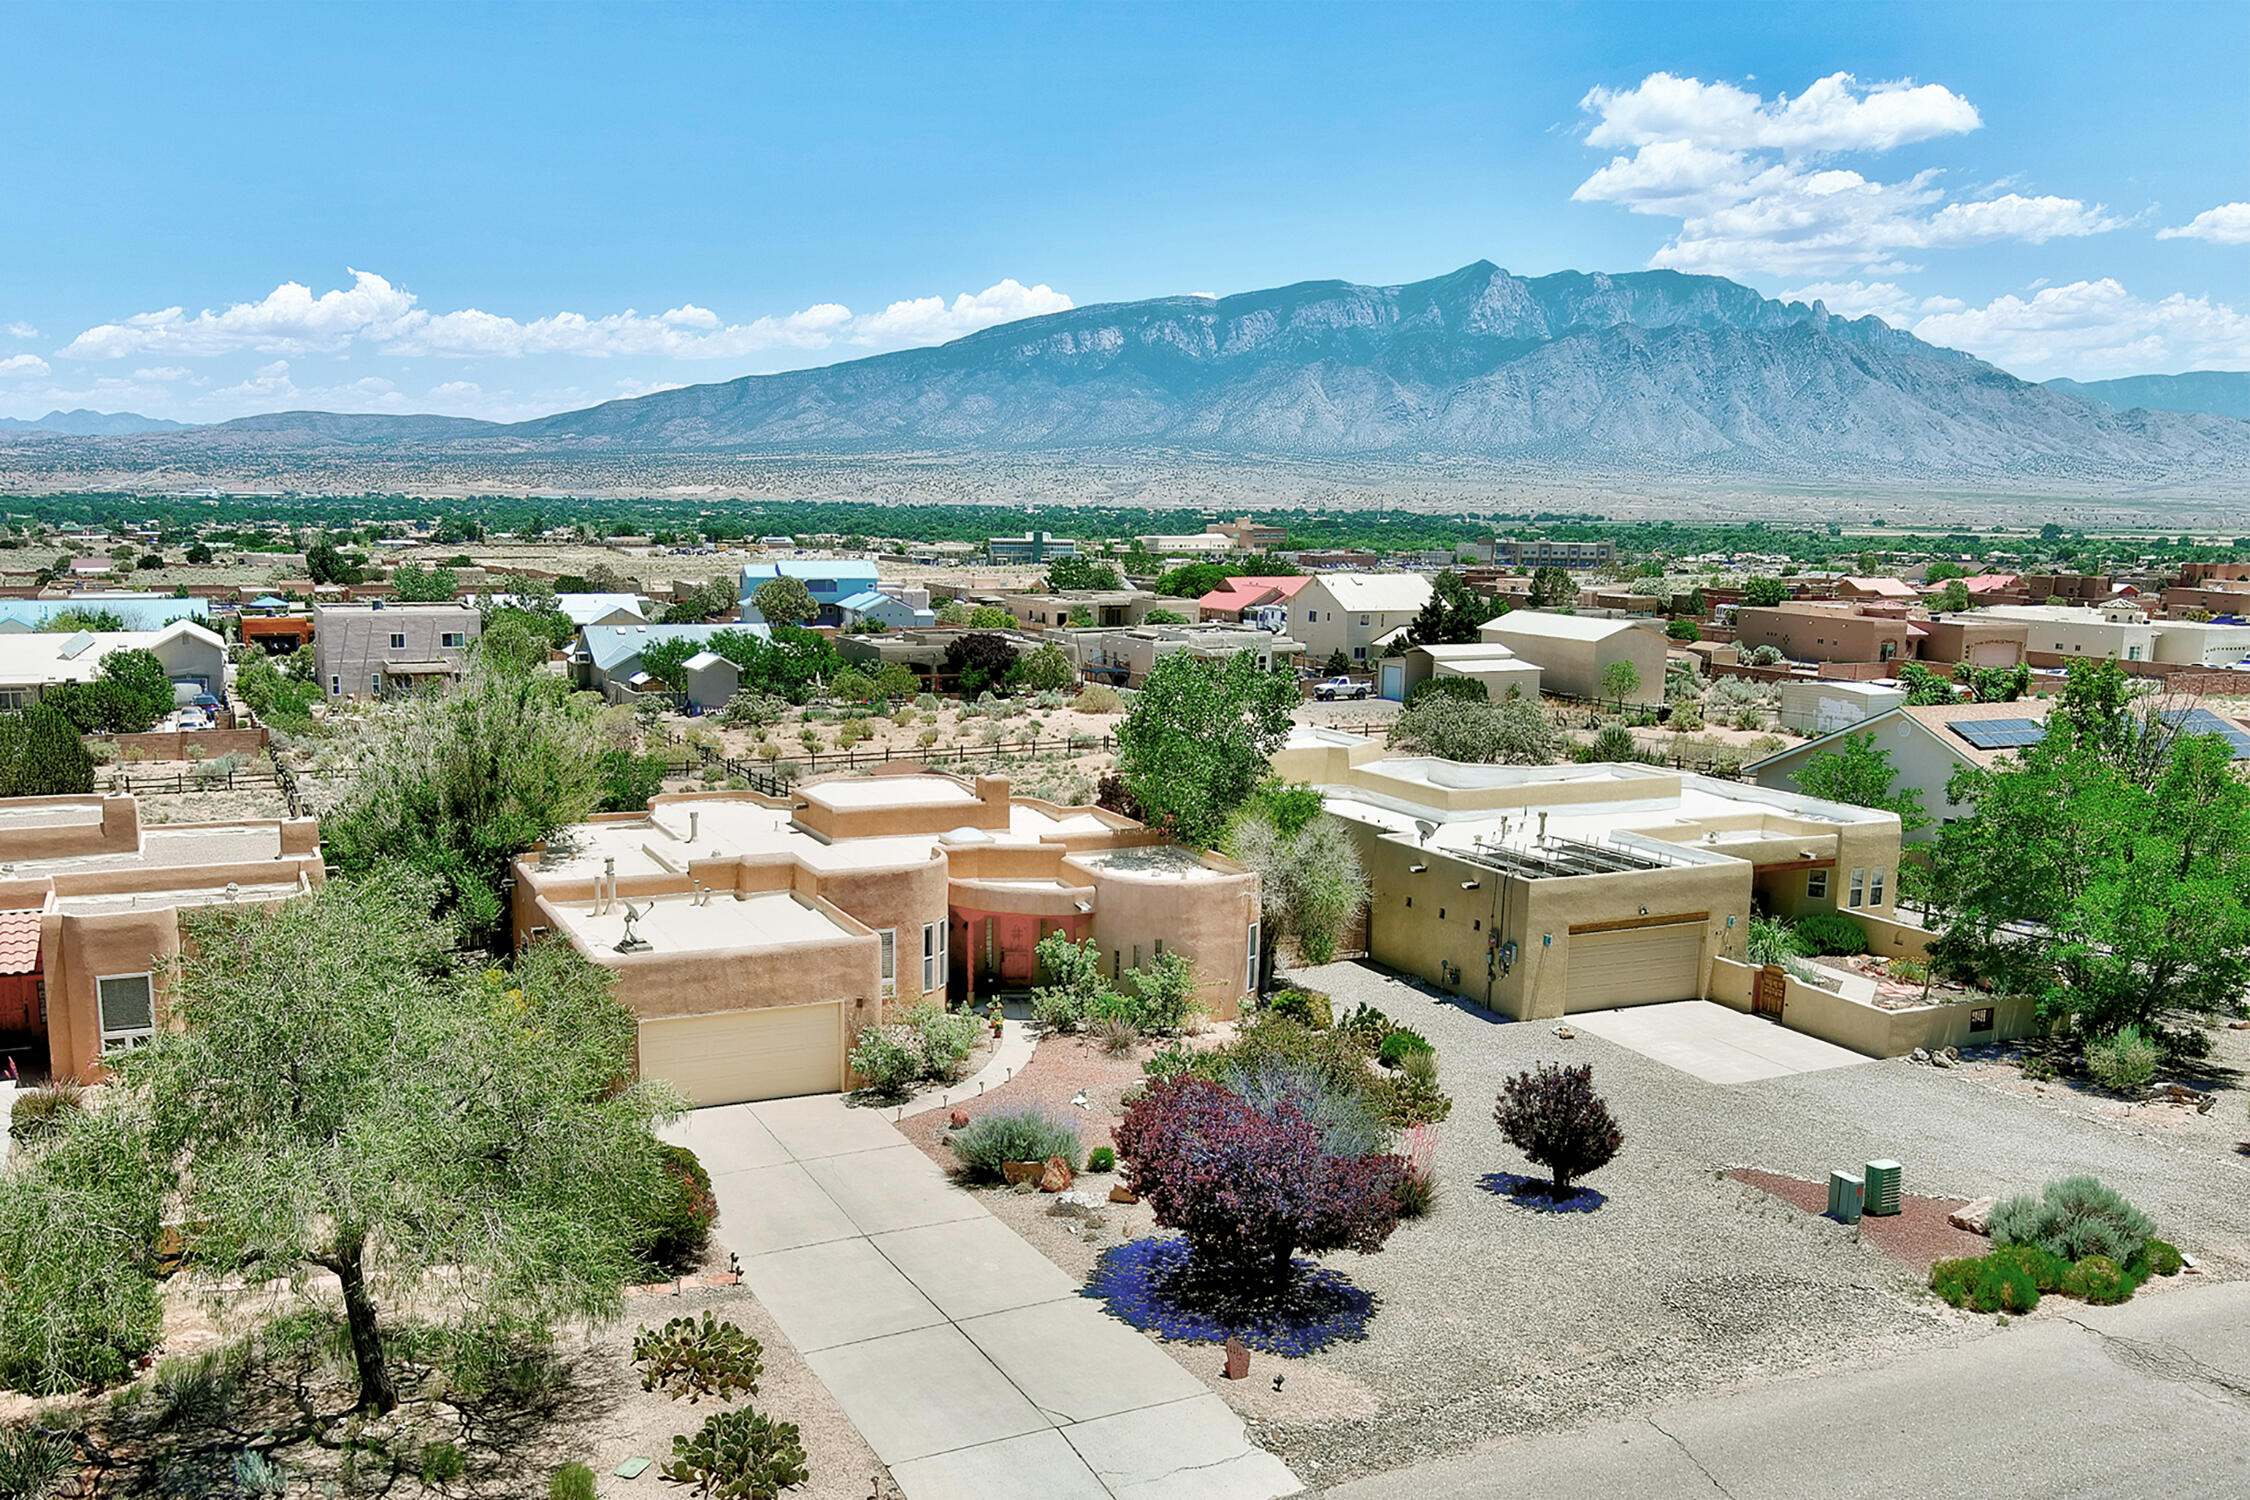 This charming single-story home in Vista Entrada boasts a landscaped half-acre lot w/breathtaking views of the majestic Sandia Mountains right from your backyard. Imagine waking up to the stunning vistas every morning! The TPO roof is just four years young. Enjoy cozy winters w/radiant floor heat & stay cool during the summer months wi/refrigerated air. This home is equipped wi/a central vac system. Step inside to find classic Southwestern touches such as corbels, vigas, and tongue & groove ceilings, adding warmth & character to the space. The kitchen & breakfast nook offer plenty of storage, cabinets w/roll-out shelving, and ample granite counter space for all your cooking adventures. Convenient to shopping, restaurants, golf courses, & entertainment. Easy access to 528 & 550.